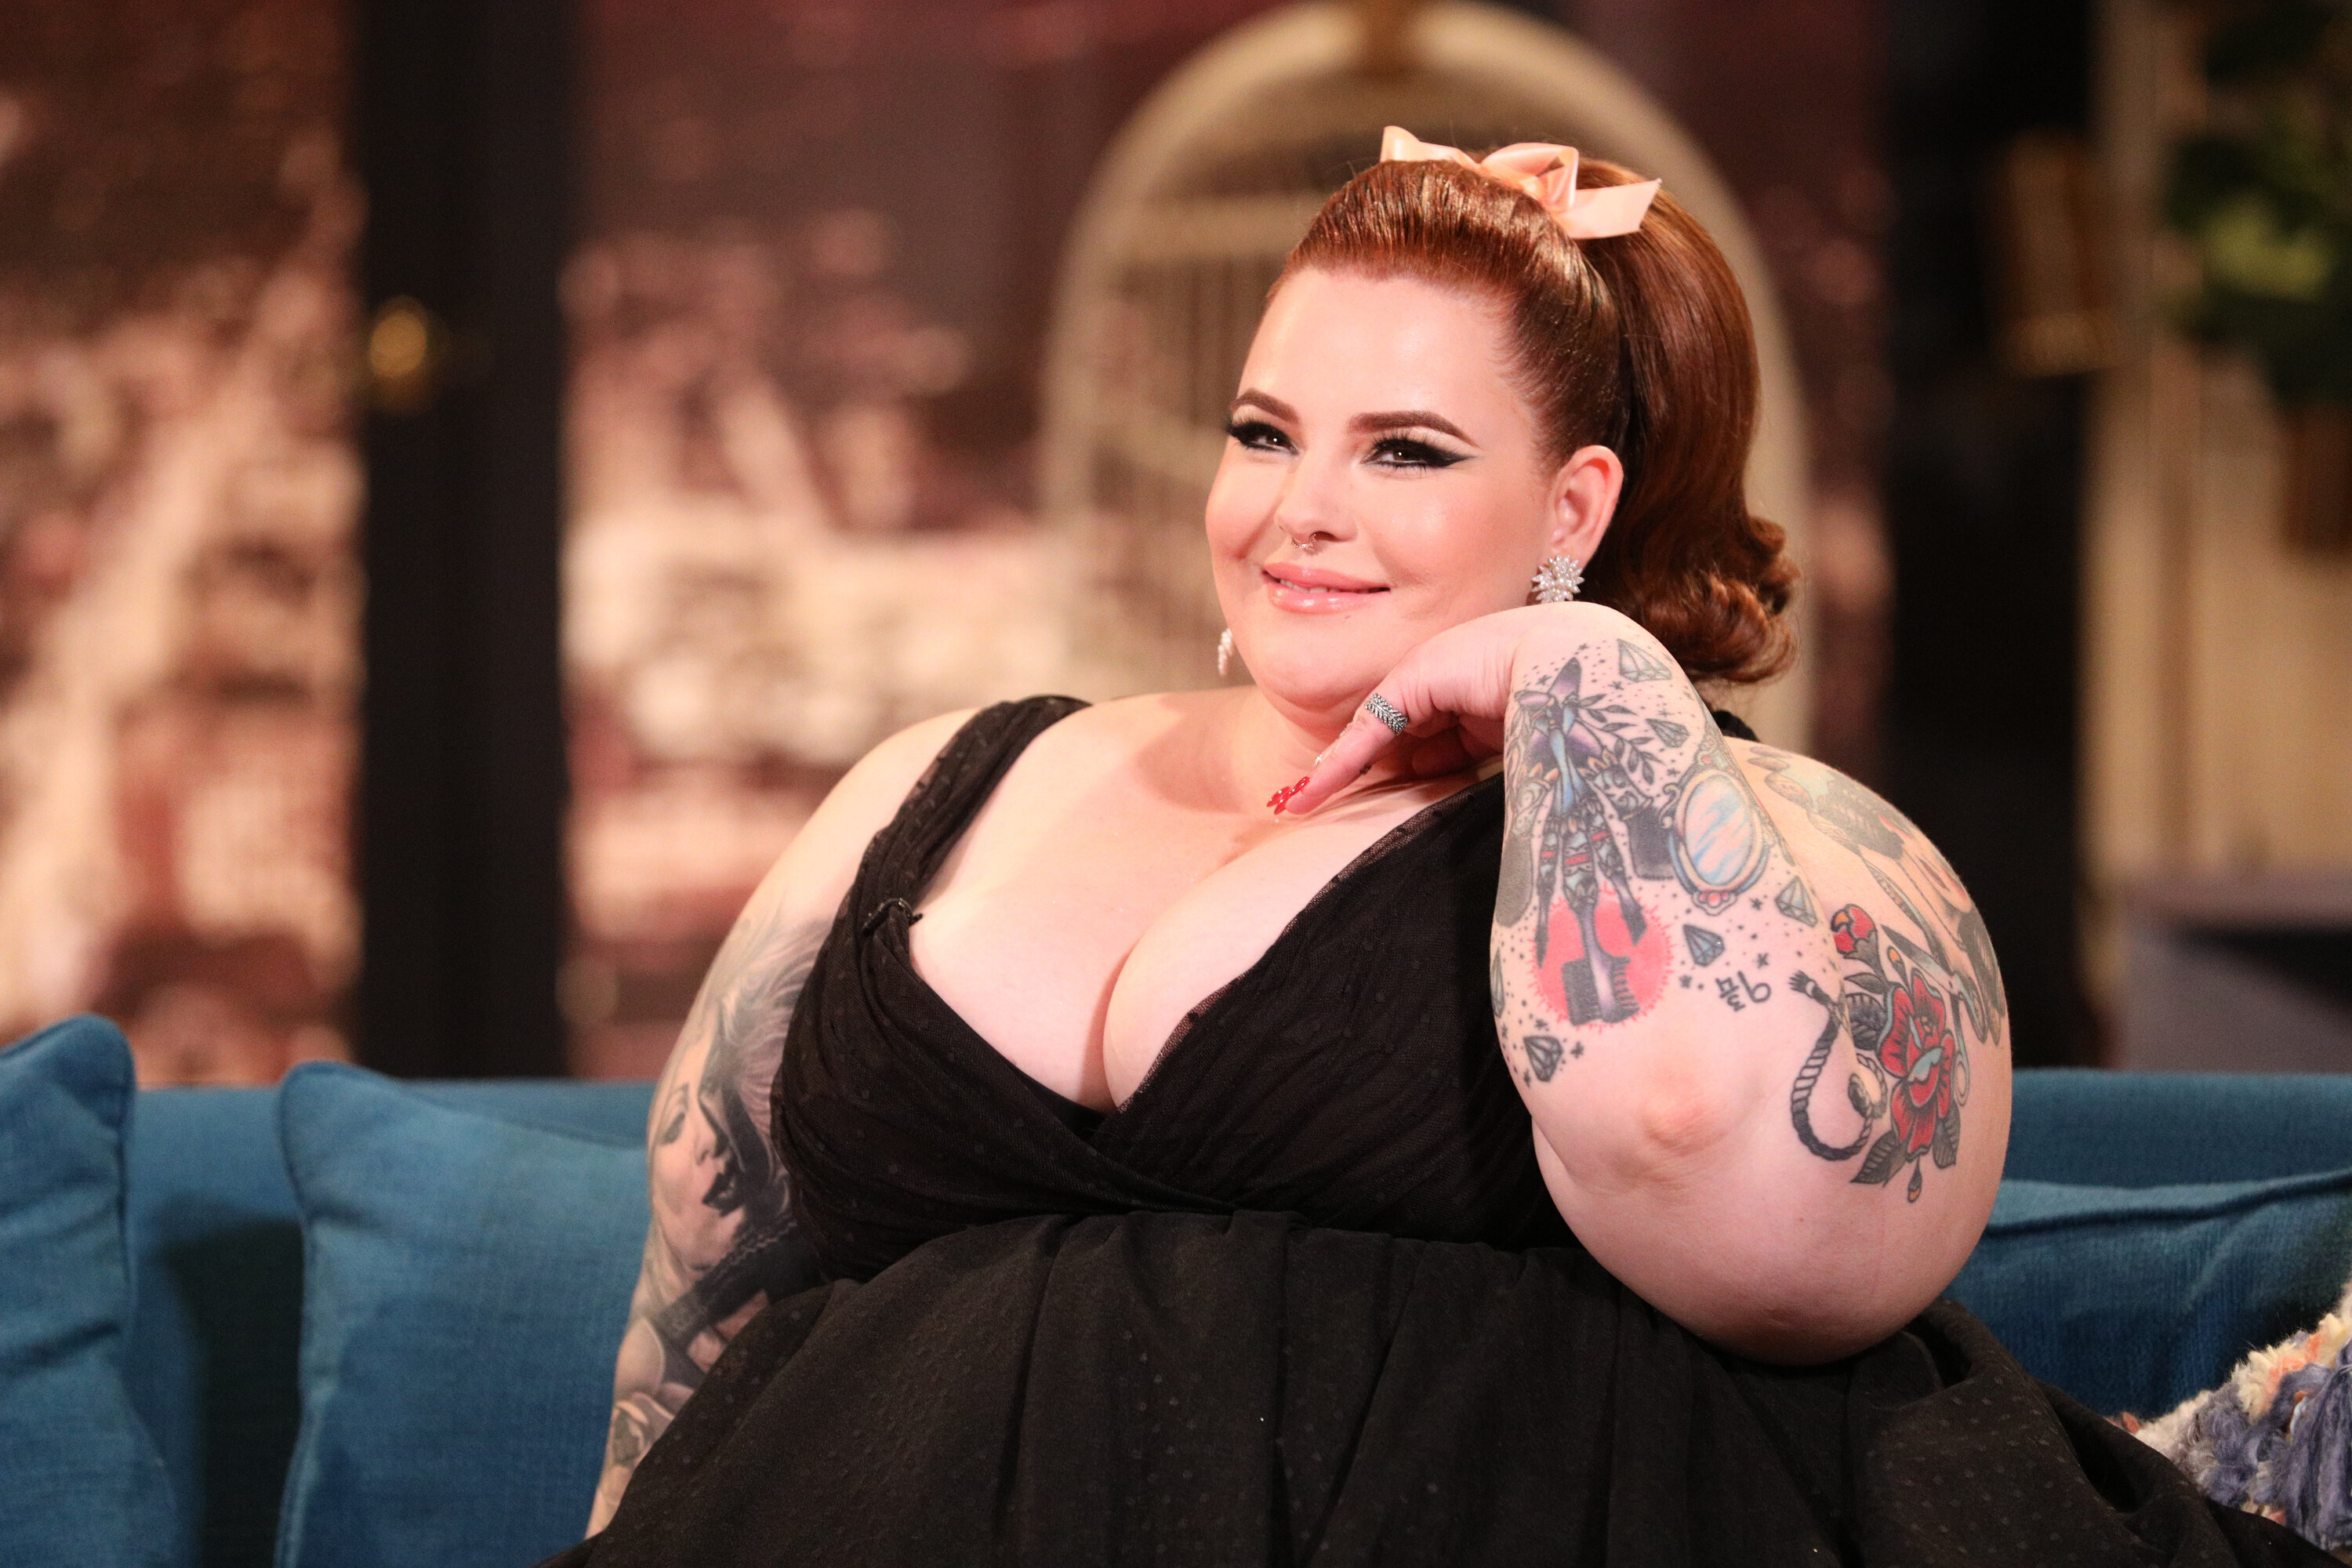 Like Tess Holliday, Im Fat And I Just Want To Live My Damn Life HuffPost HuffPost Personal image